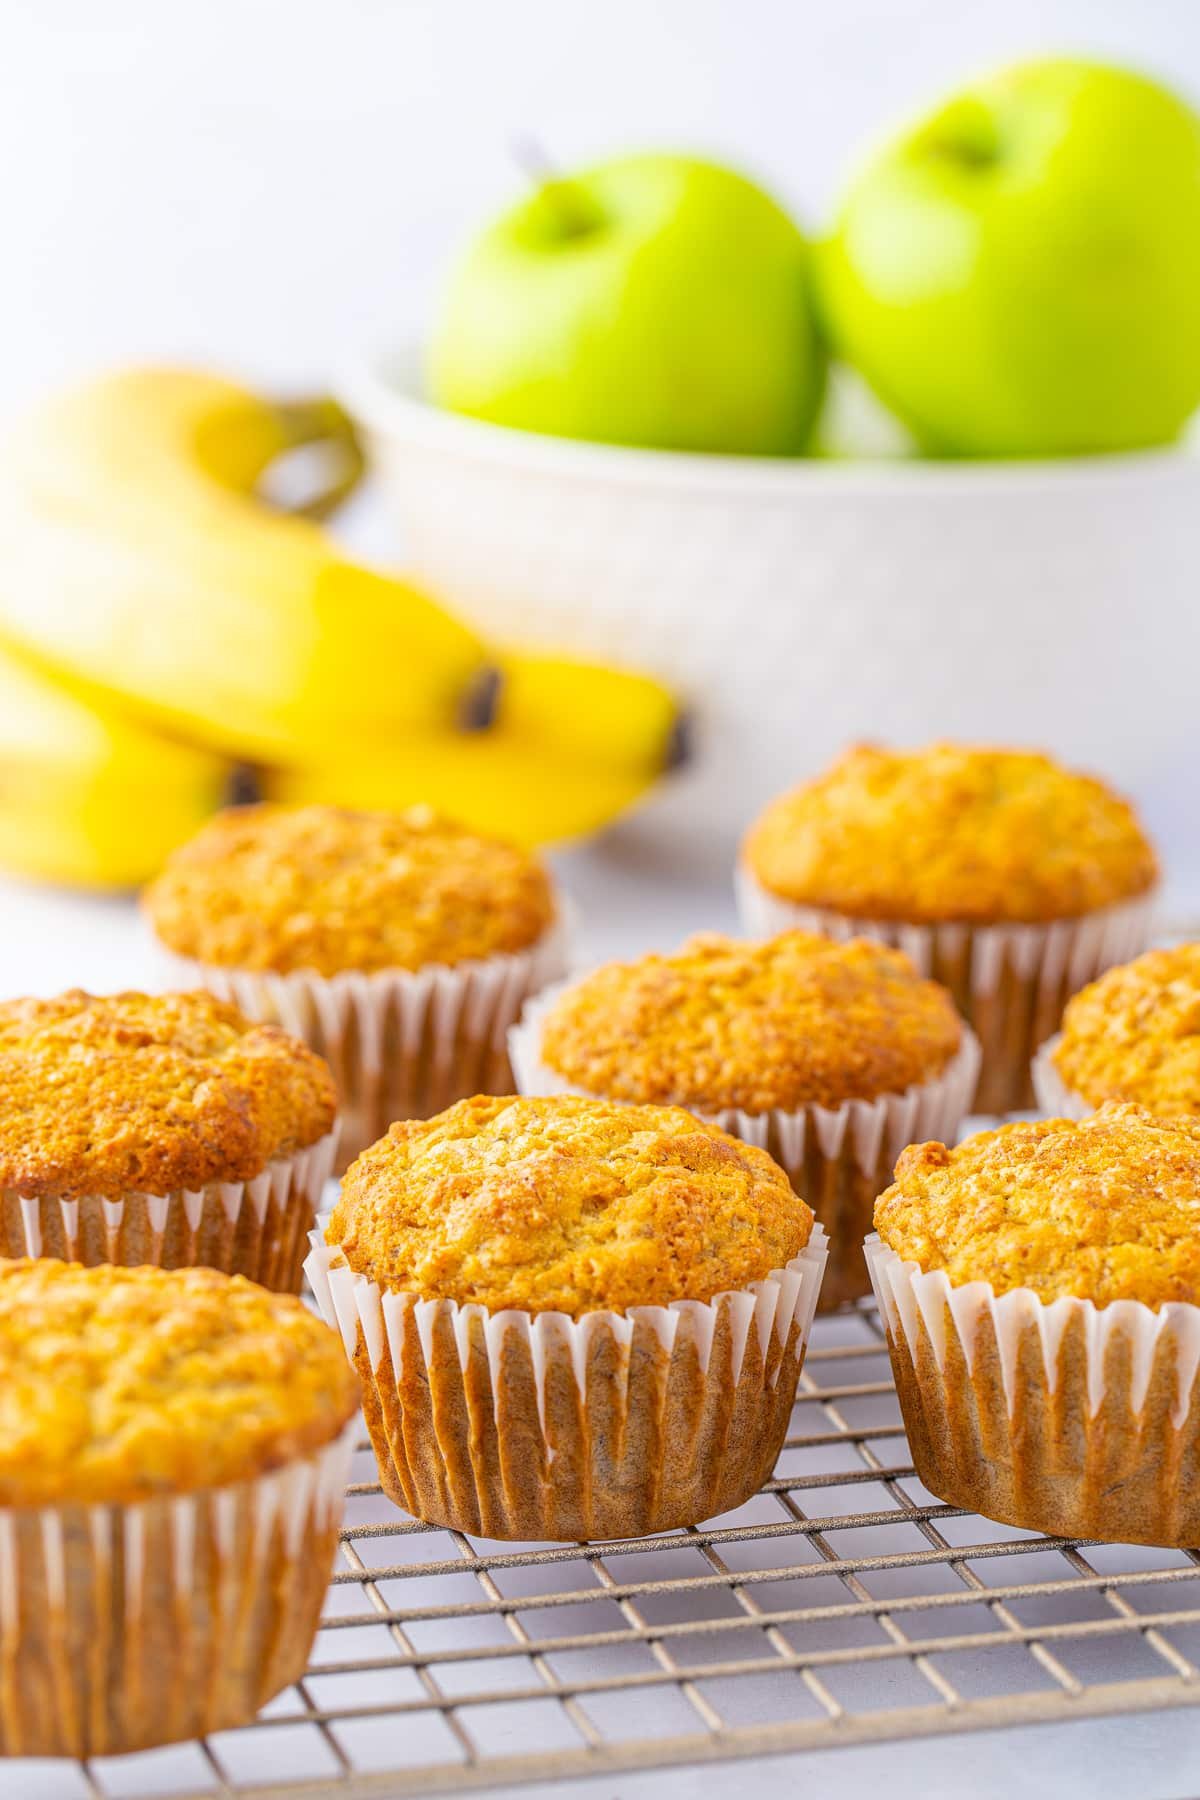 Apple Banana Oat Muffins on wire rack in liners with fruit in background.